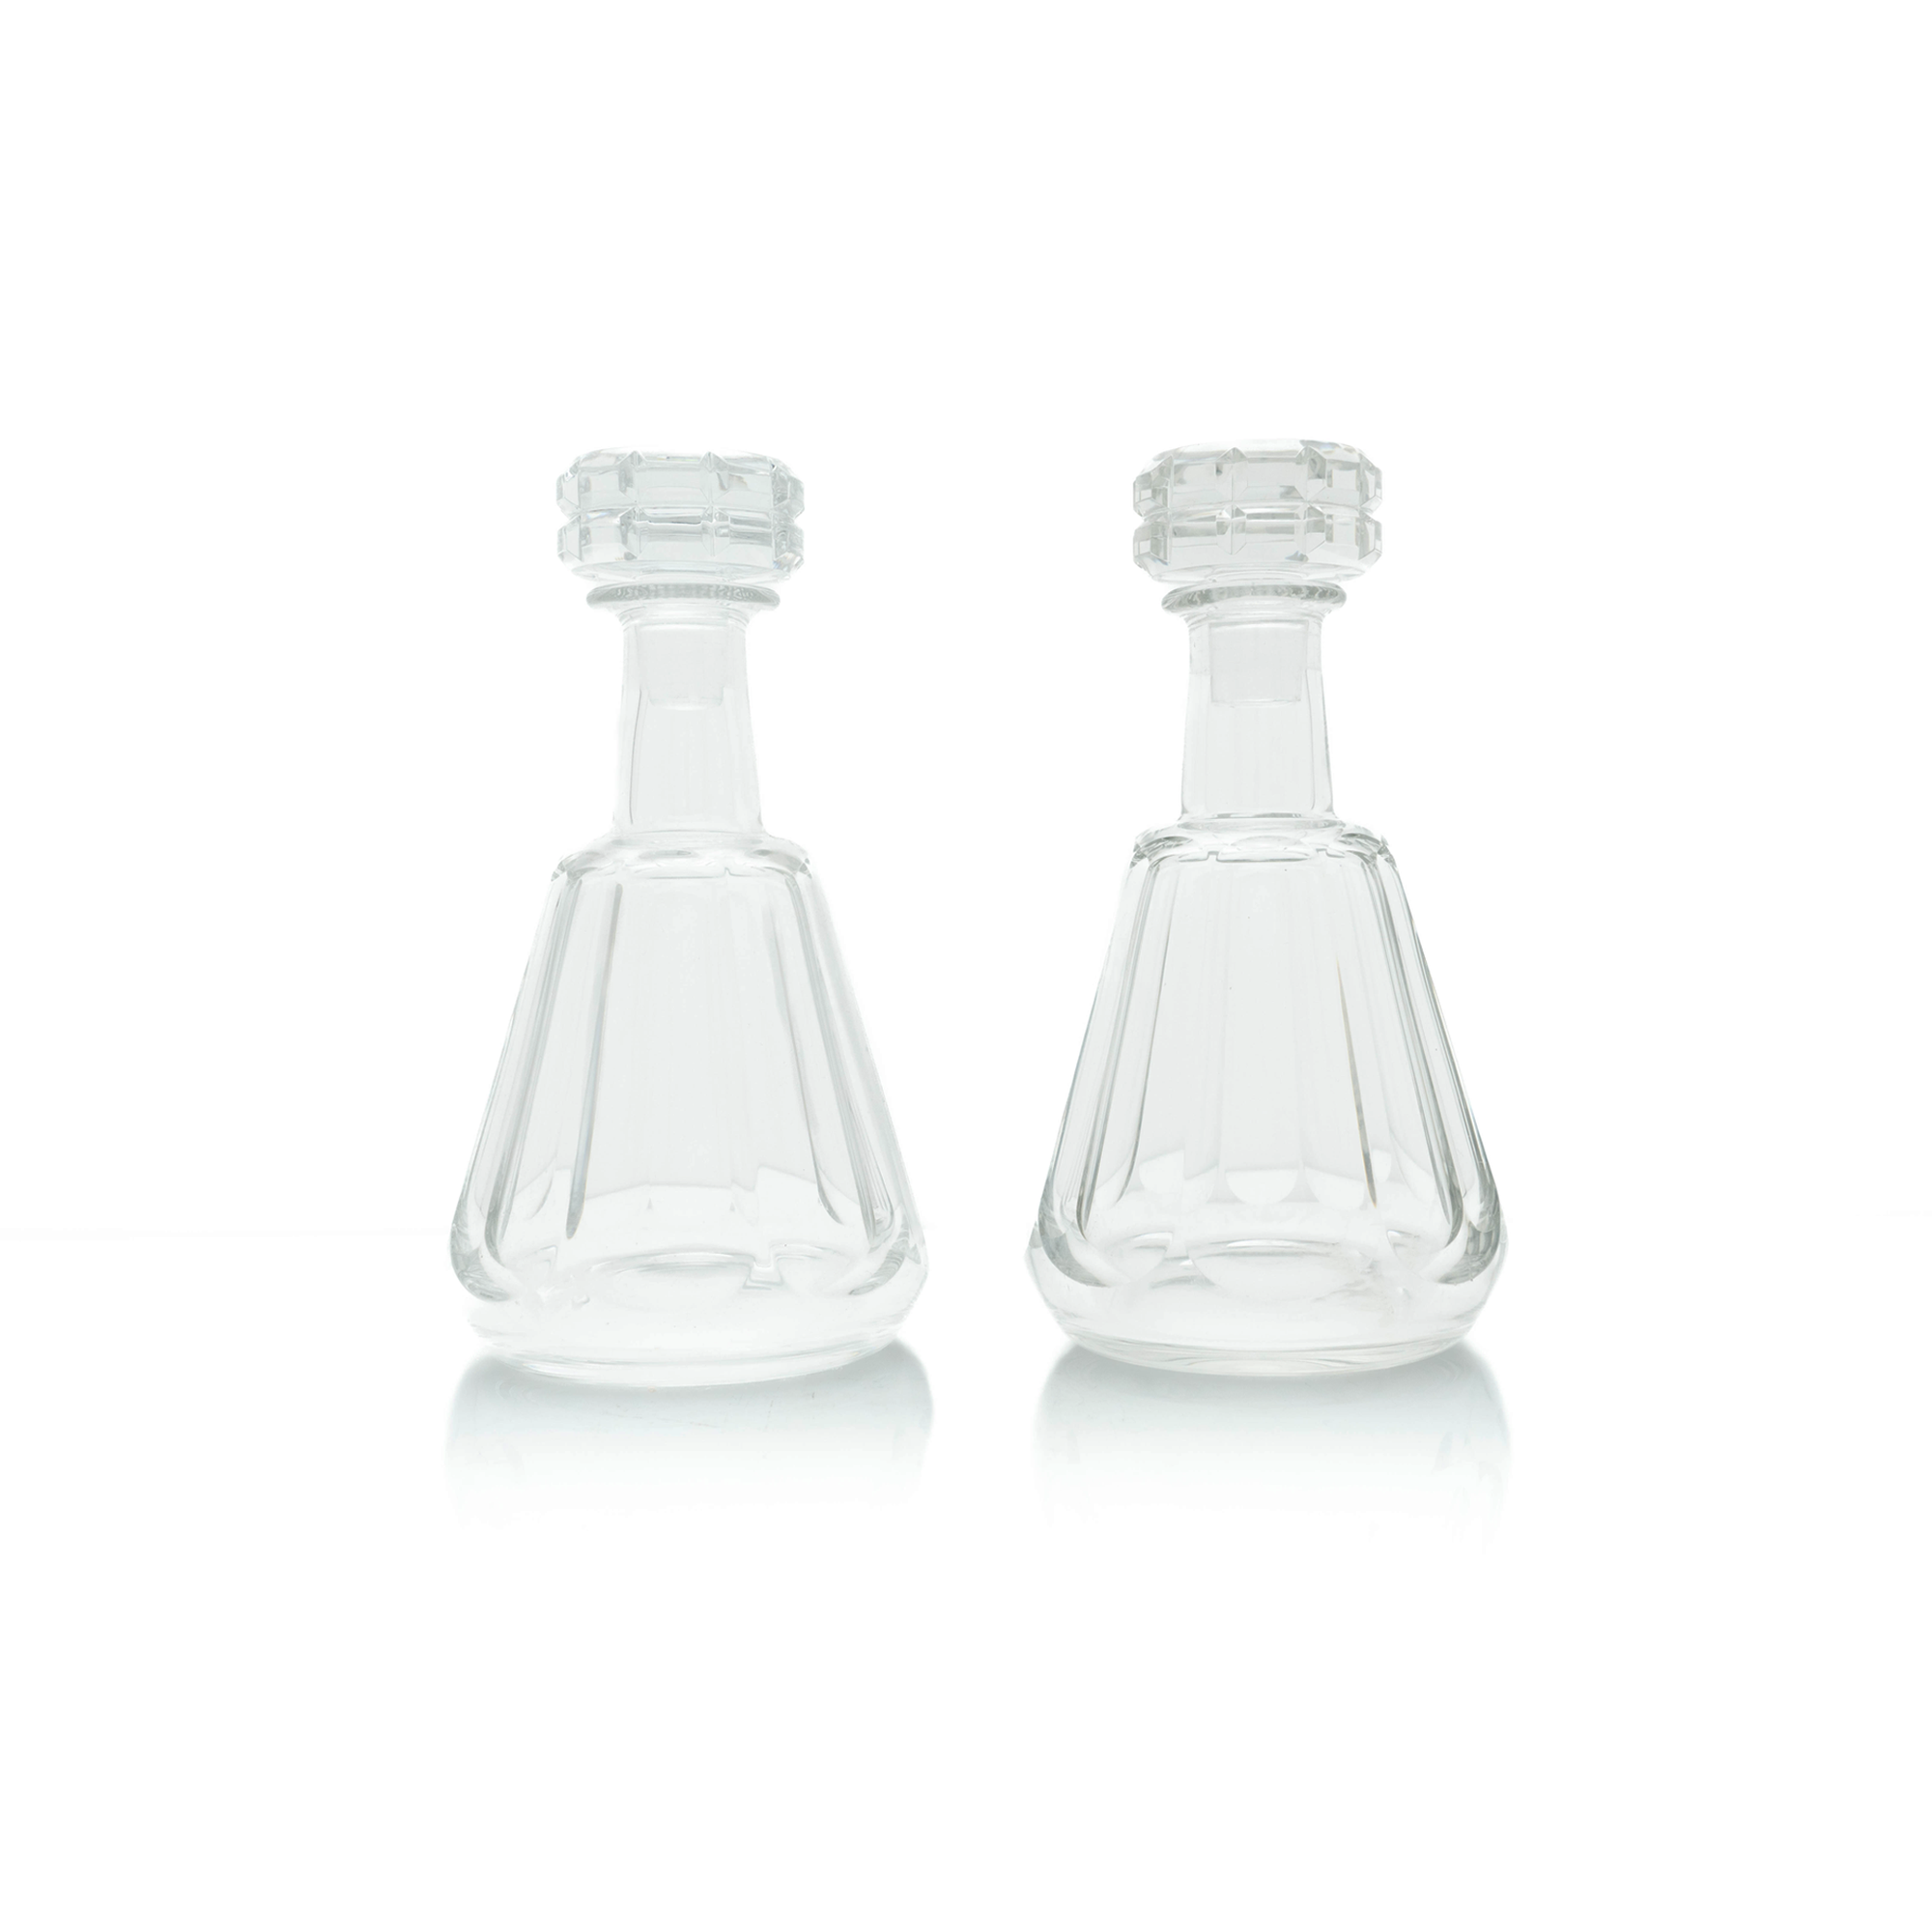 Baccarat Faceted Decanters